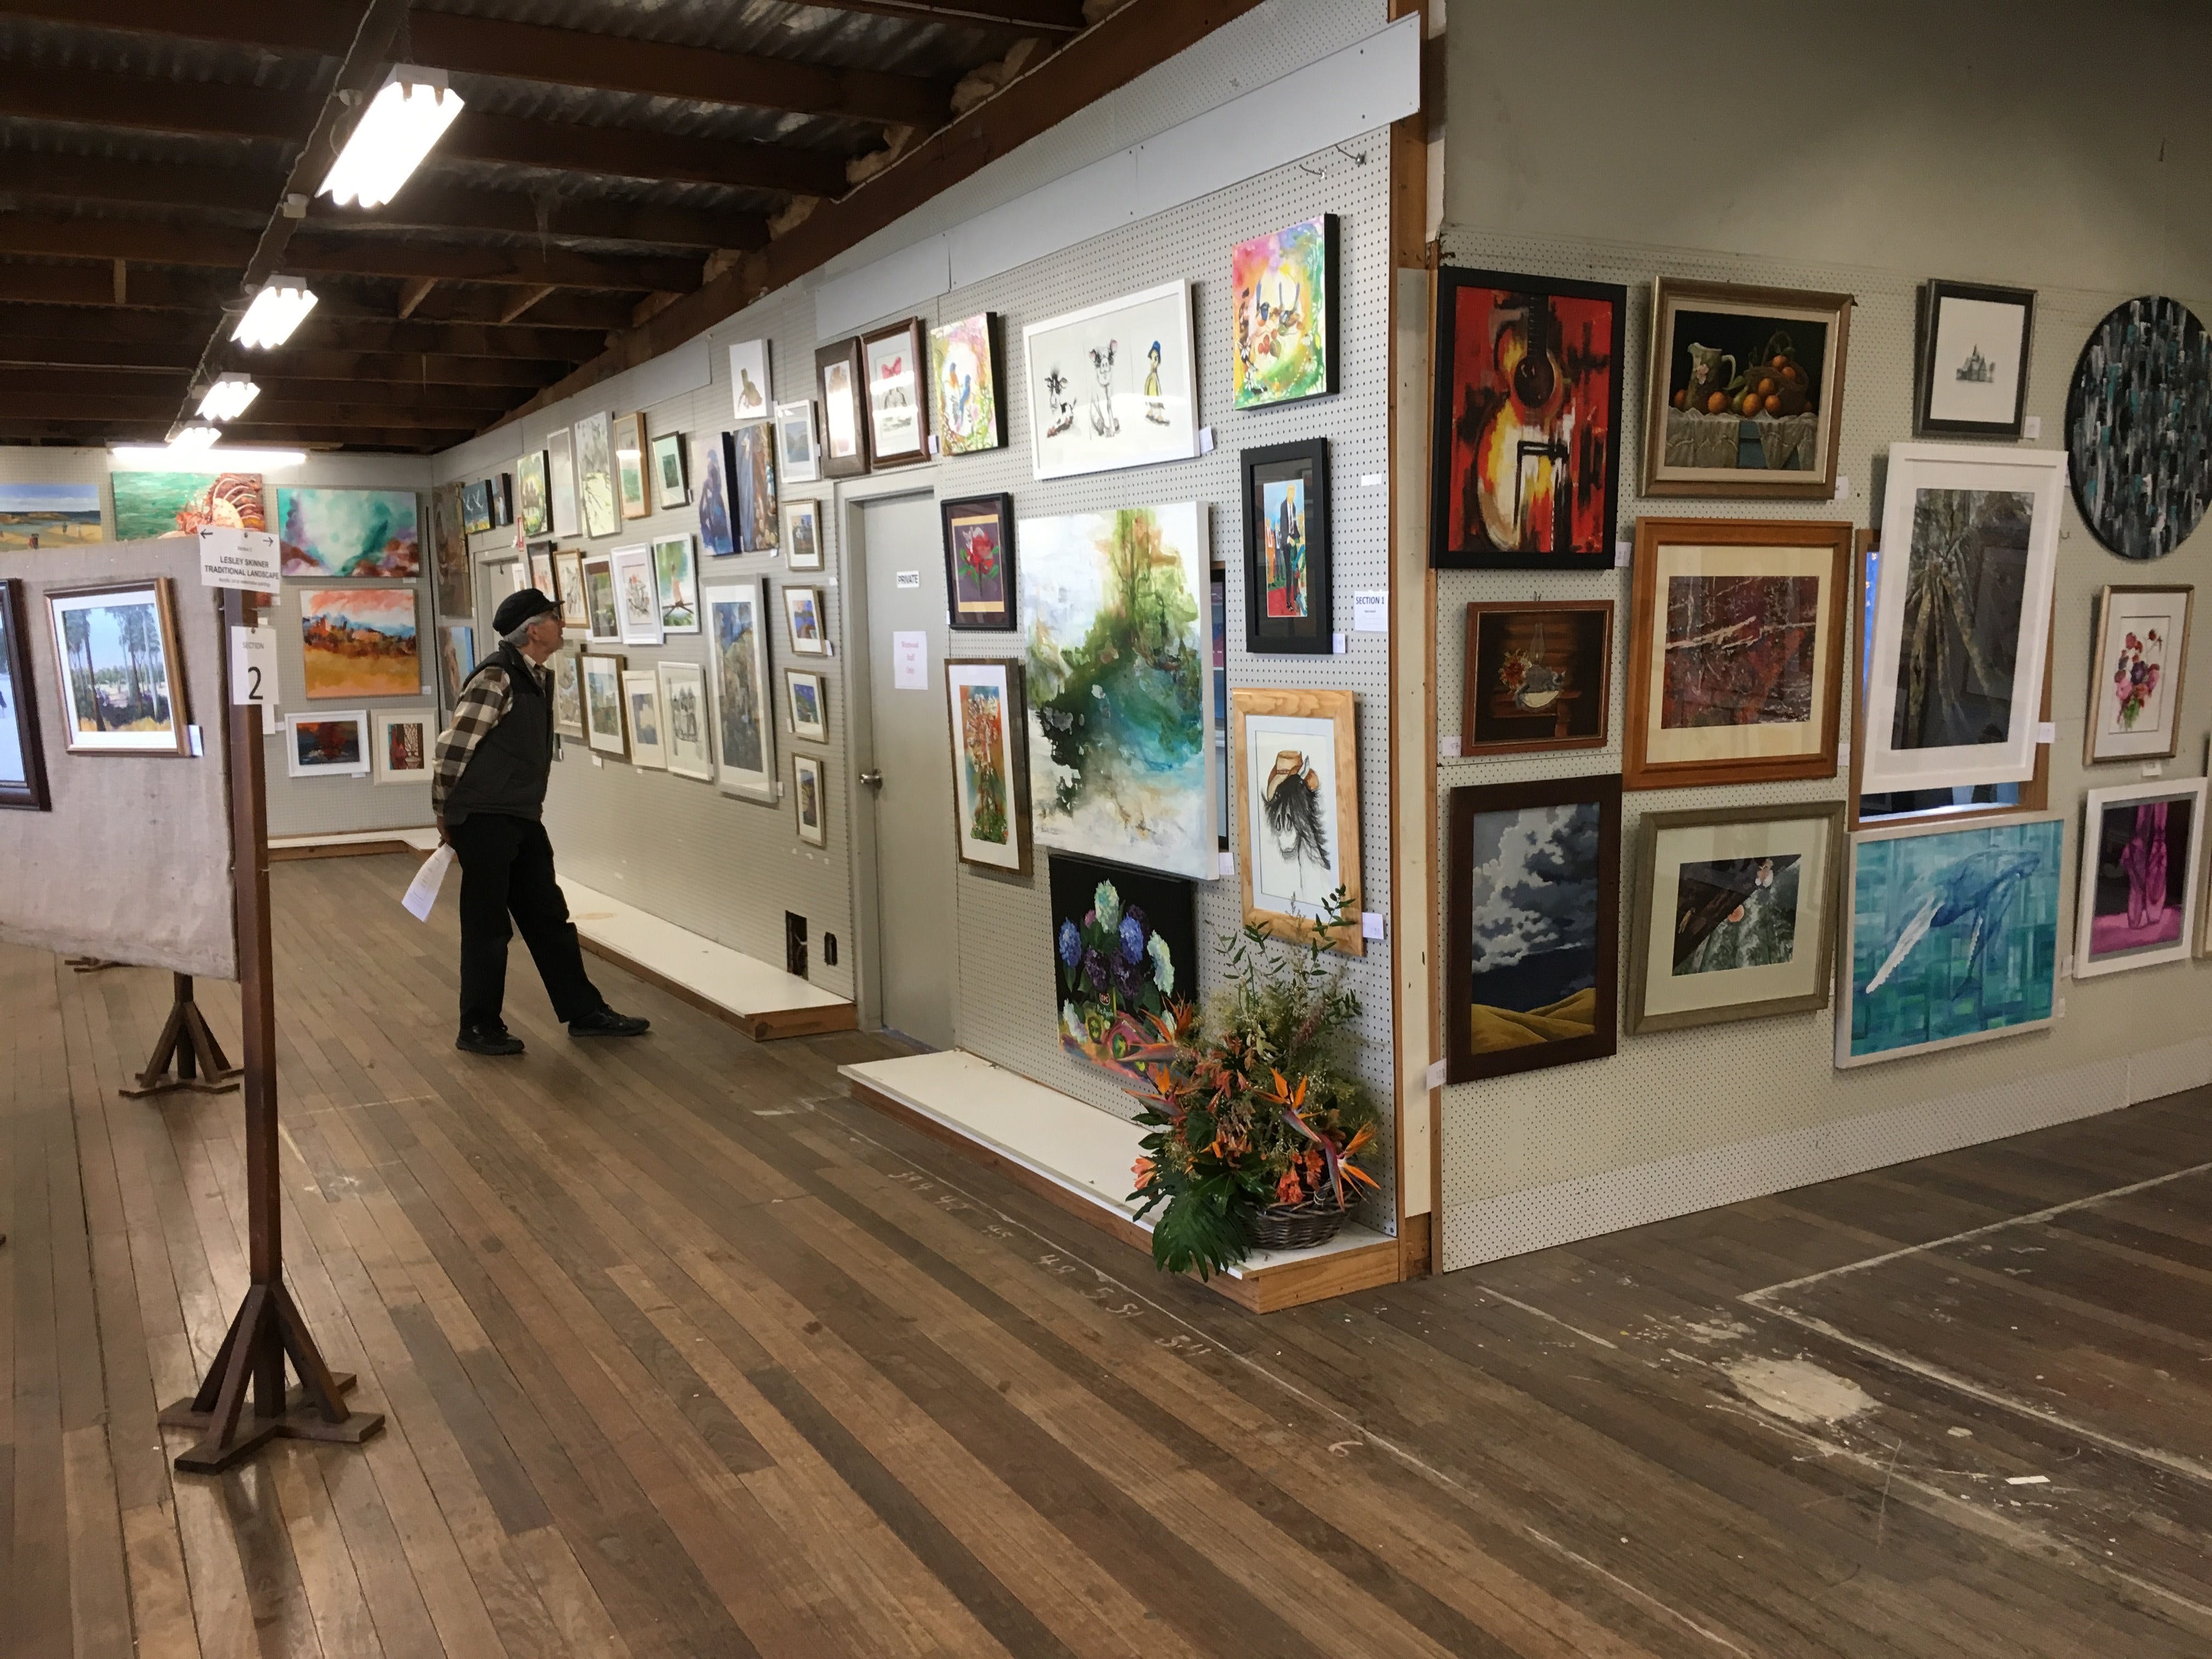 Dungog Arts Society Annual Exhibition - Townsville Tourism